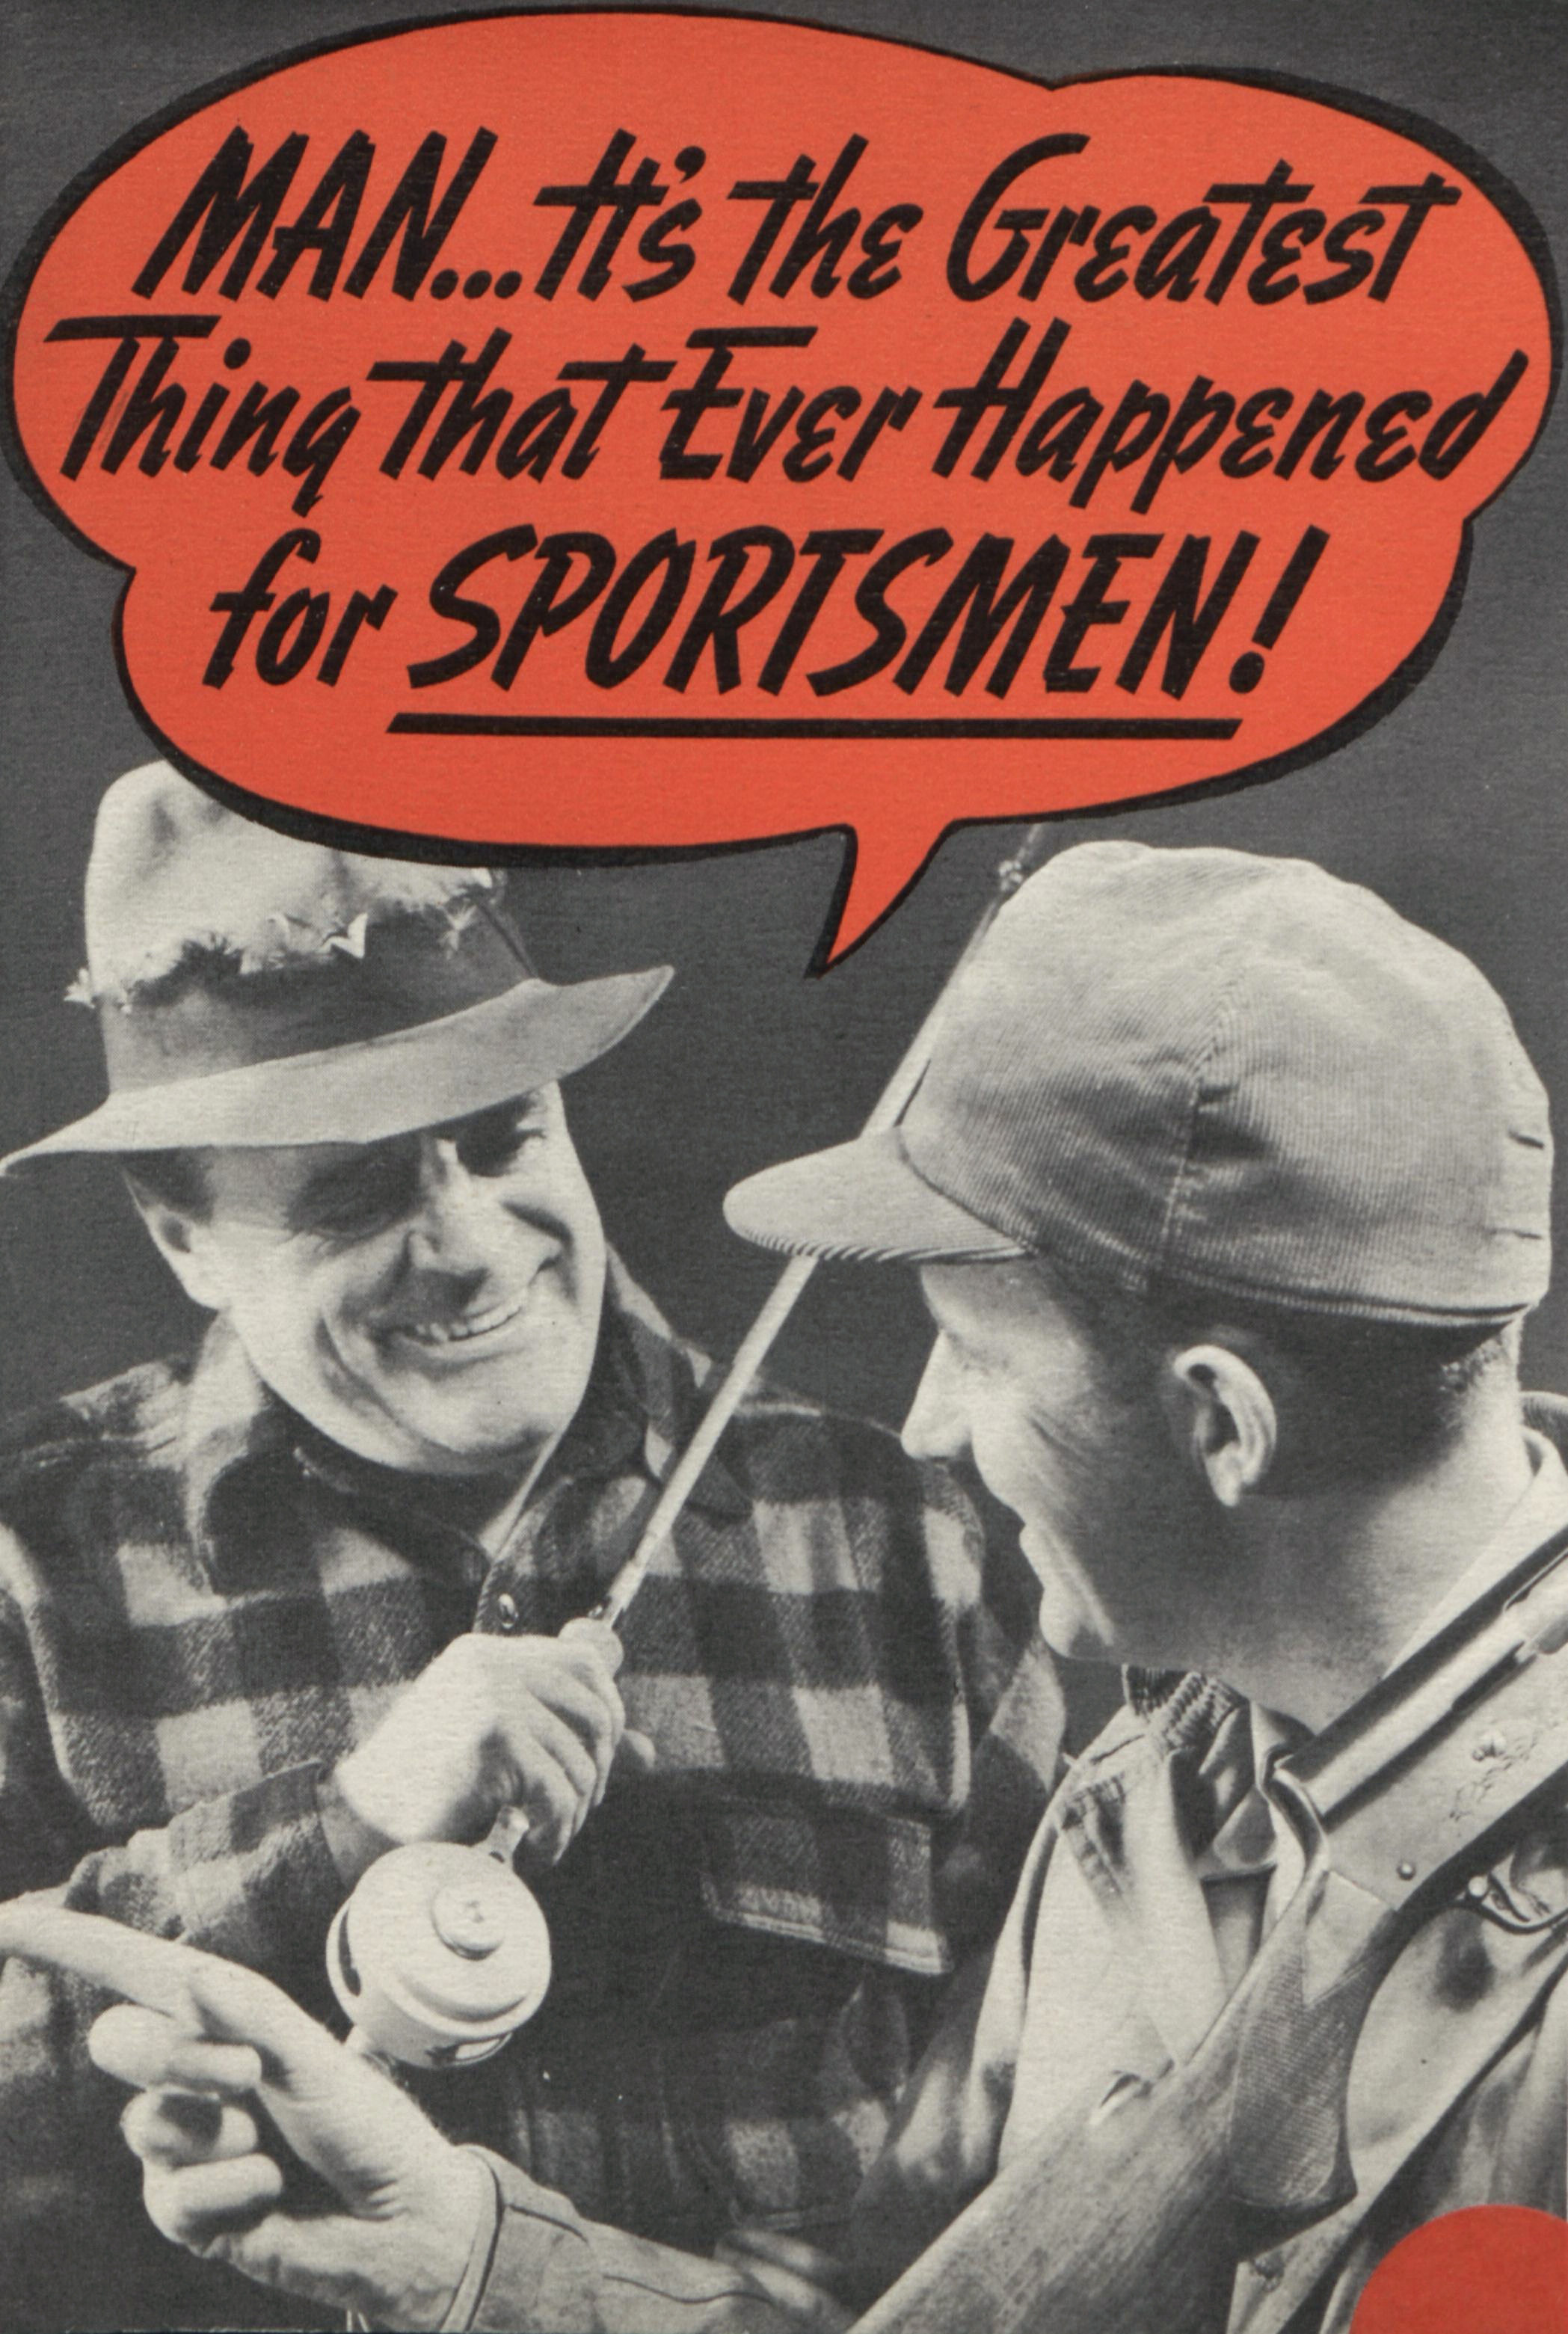 Catalog cover. Black and white image of two fishermen. Text reads "Man ... It's the Greatest Thing that ever Happened for Sportsmen!"